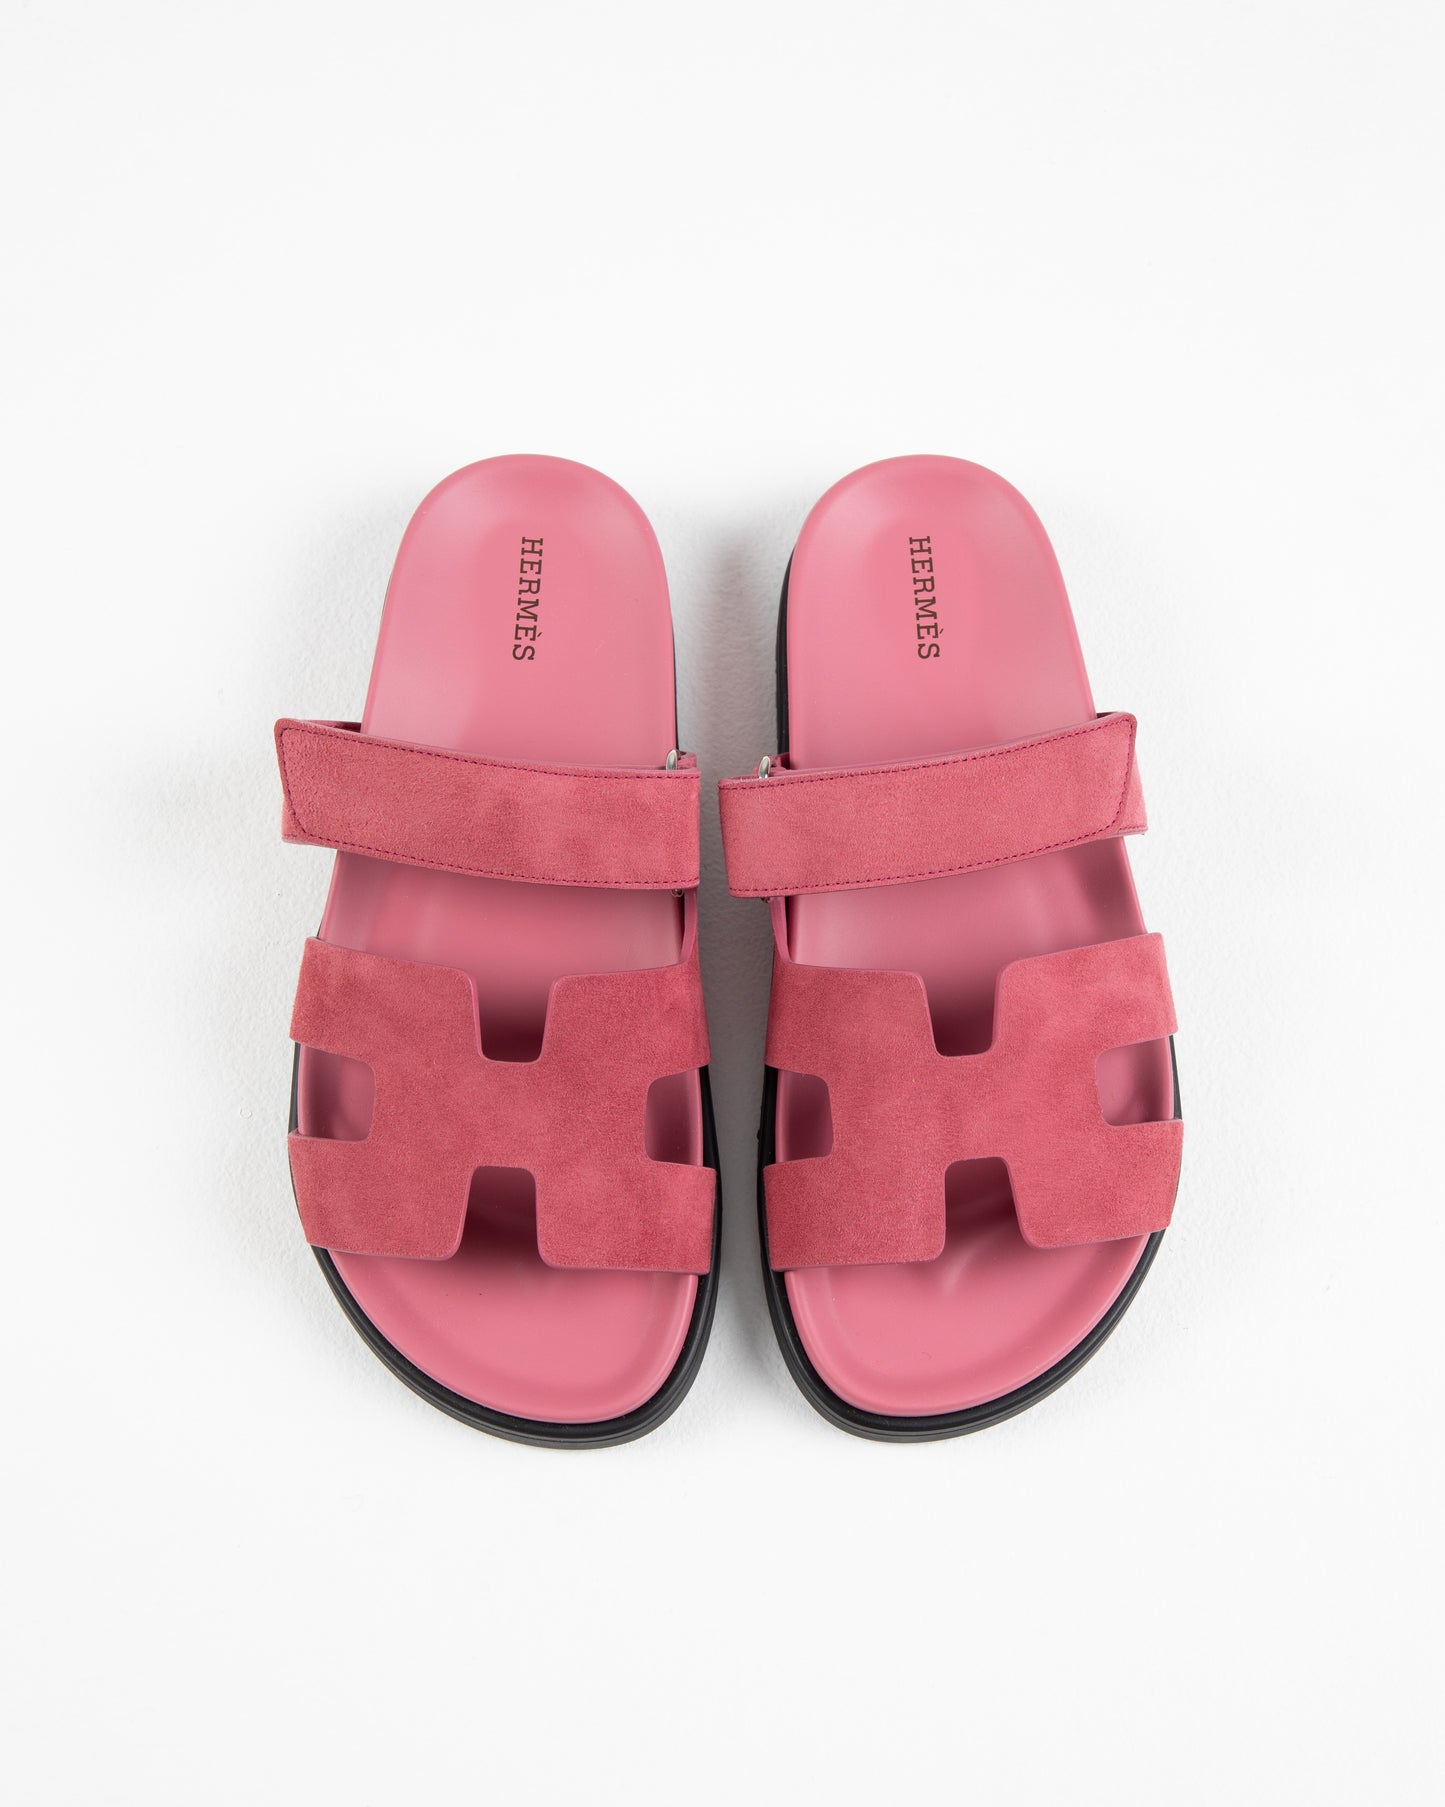 Chypre Sandal in Aphrodite Pink Suede